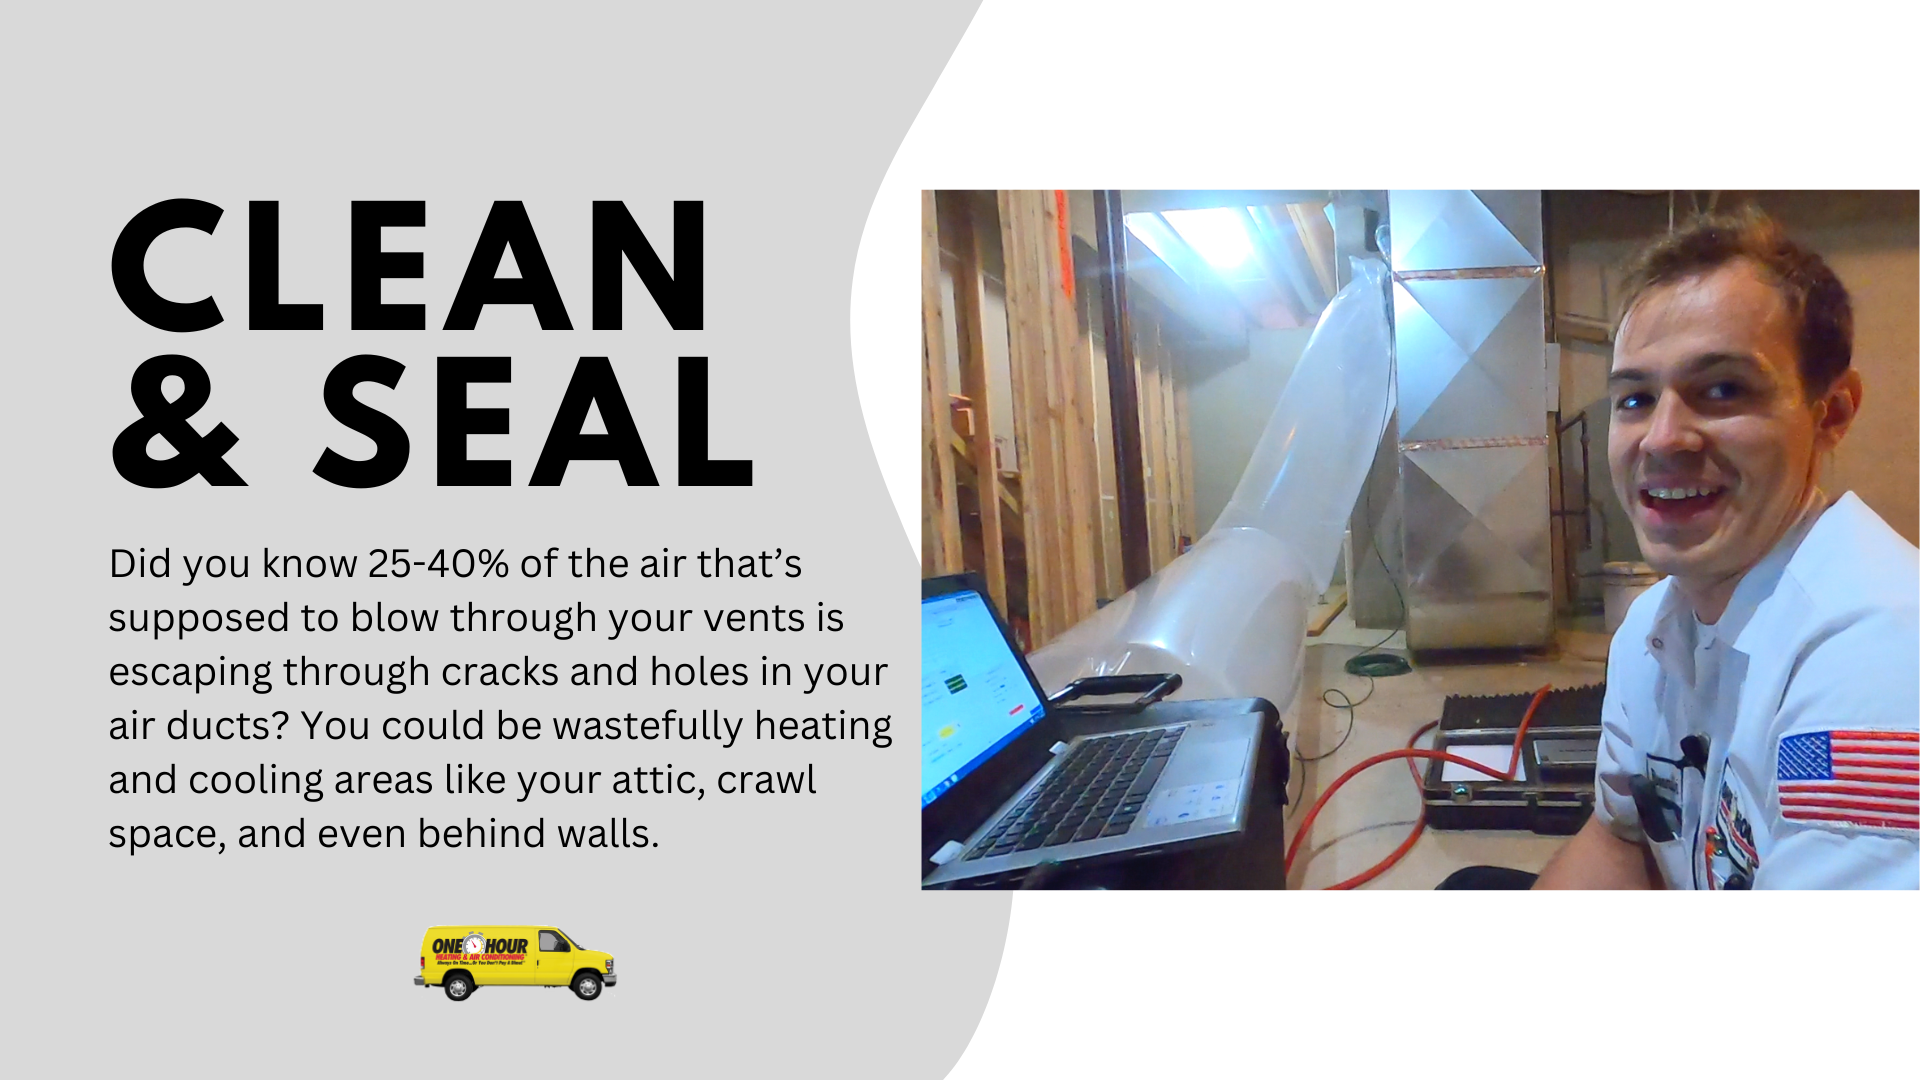 DUCT CLEANING AND SEALING